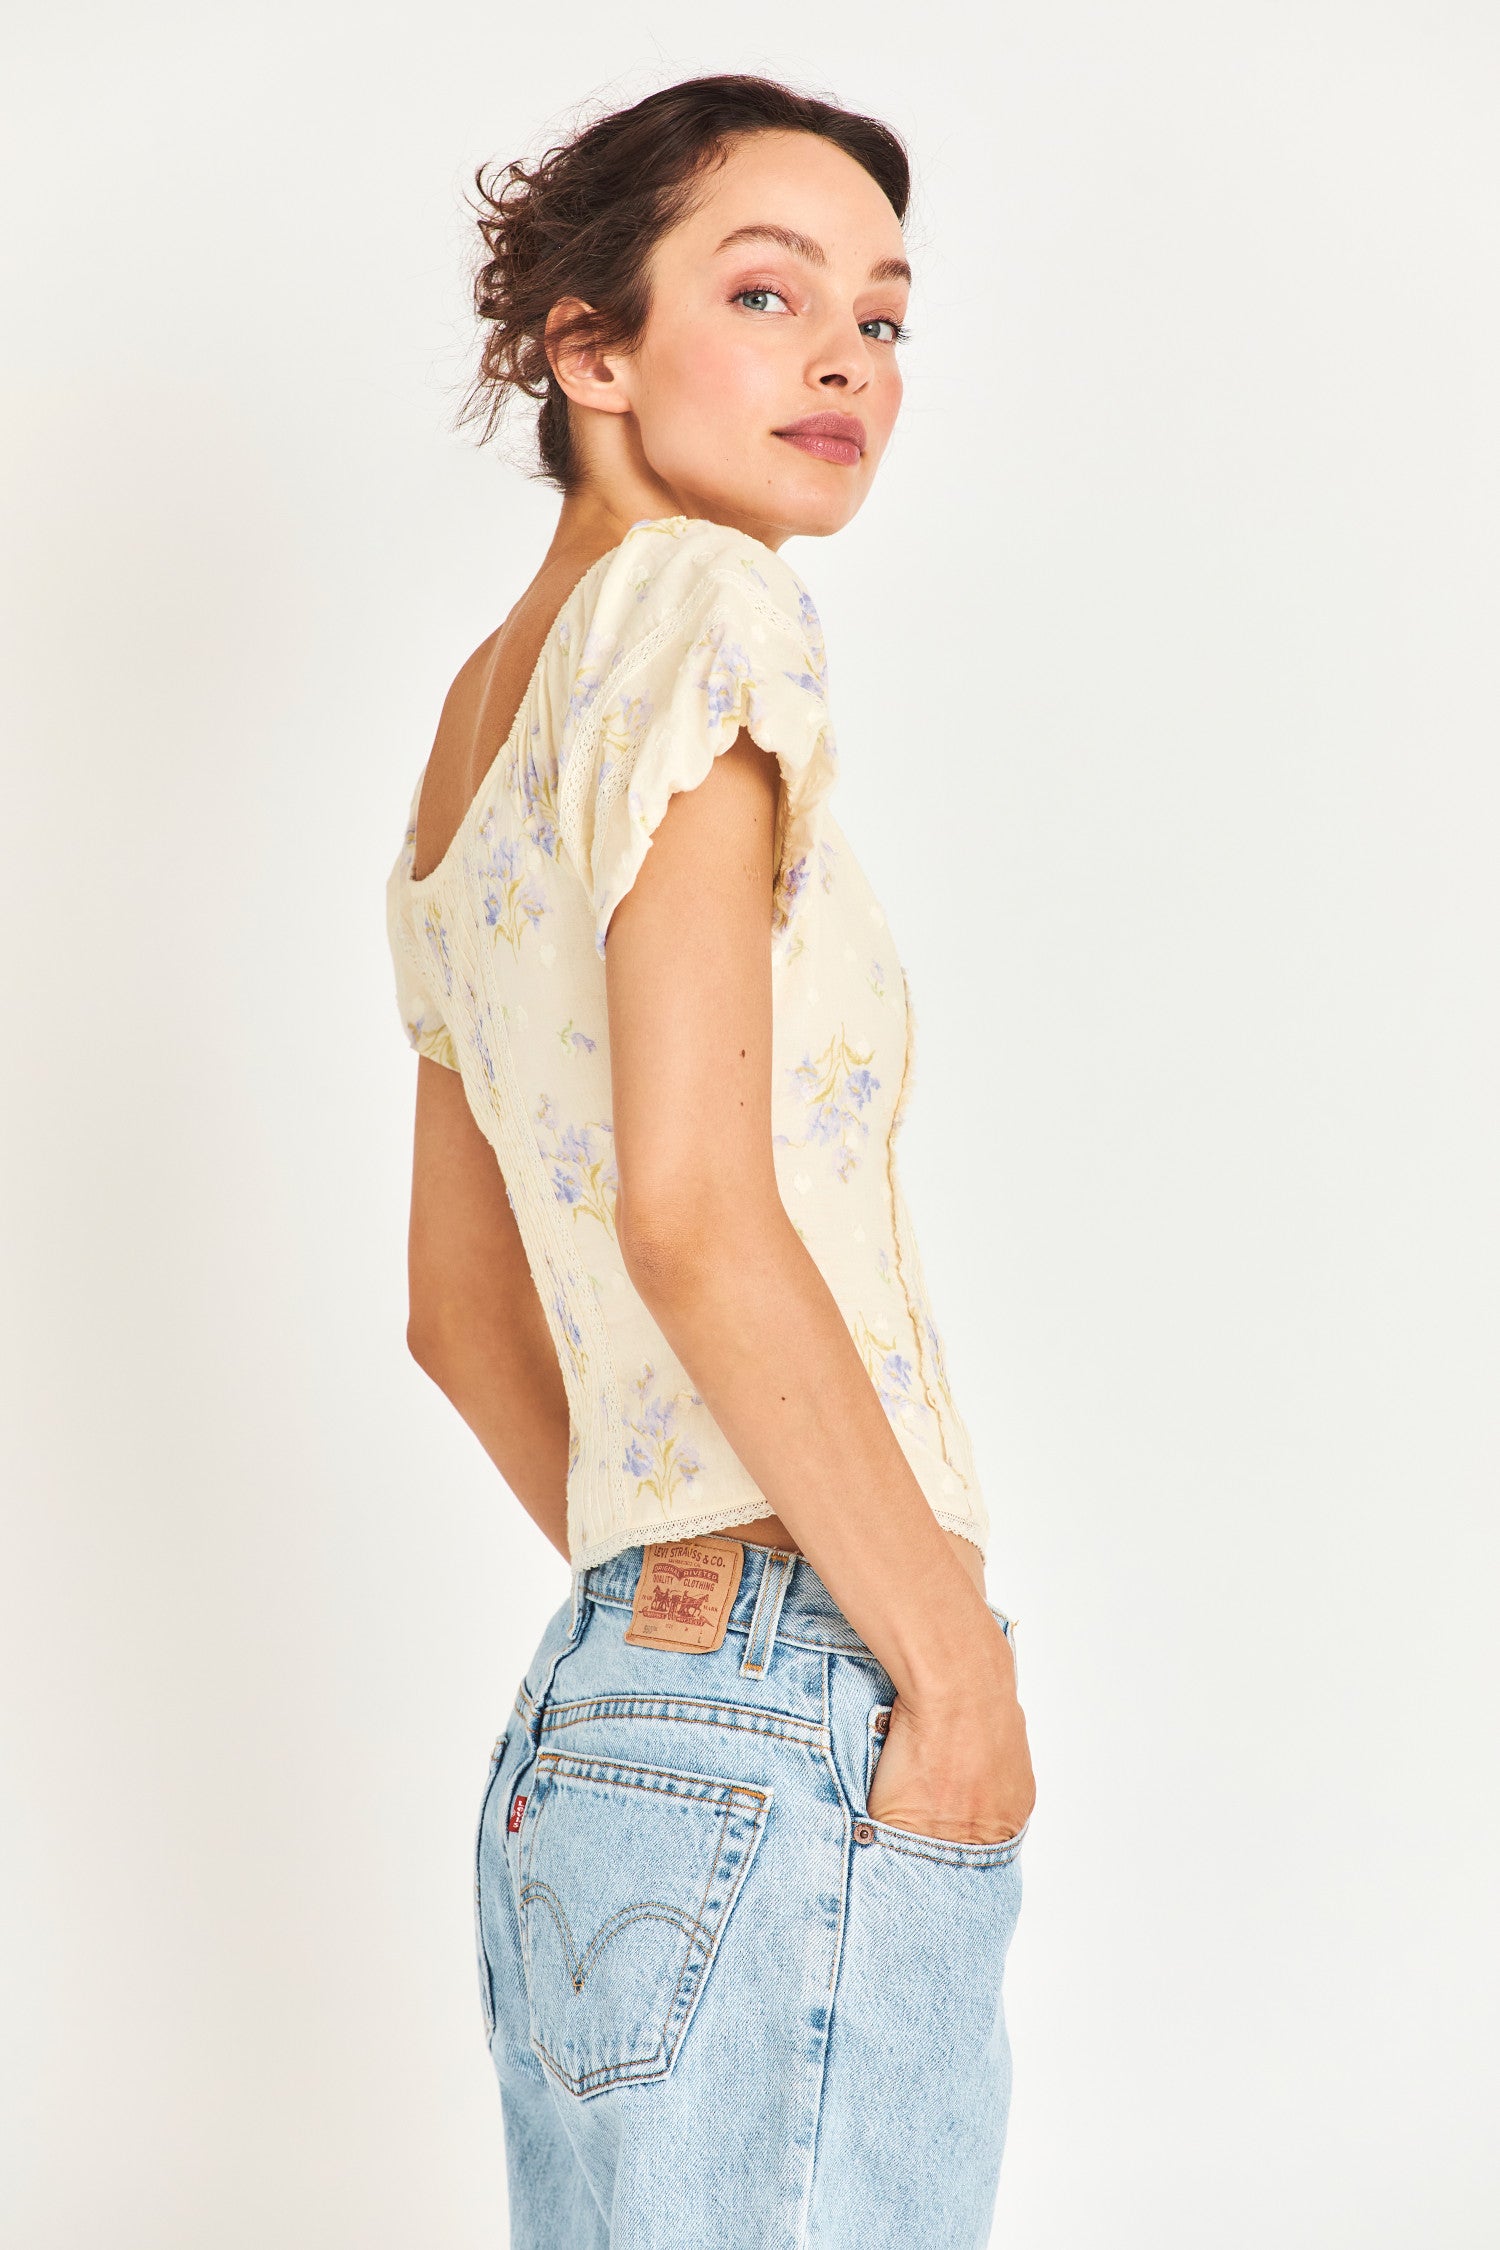 The Zia top is a Victorian-inspired soft yellow fitted corset top that features a stunning textured clip dotted heart shape dobby fabric that gives it an antique feel. It features delicate custom lace detail and an elasticated shoulder to wear off or on the shoulder. It also features a baby blue flower print. 